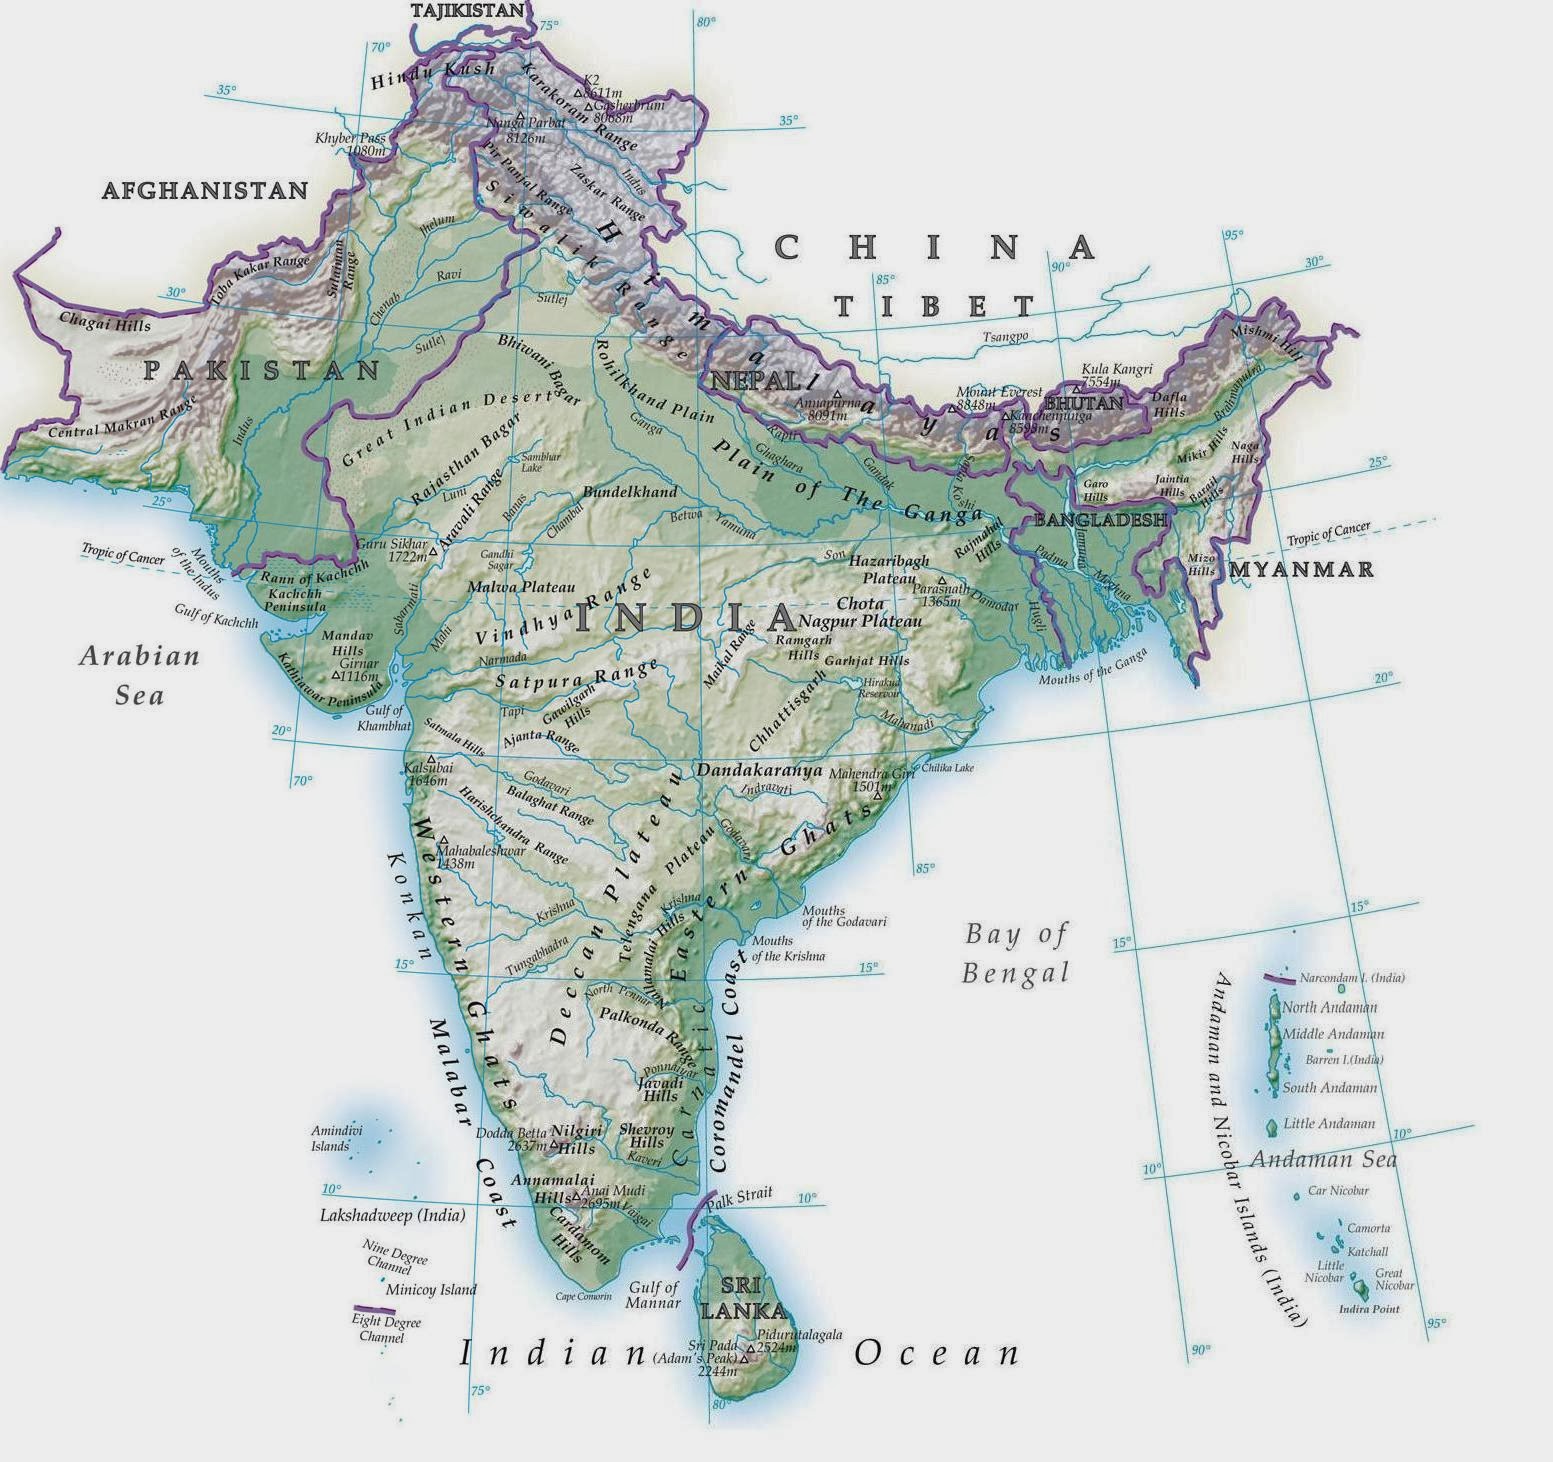 geography phd in india